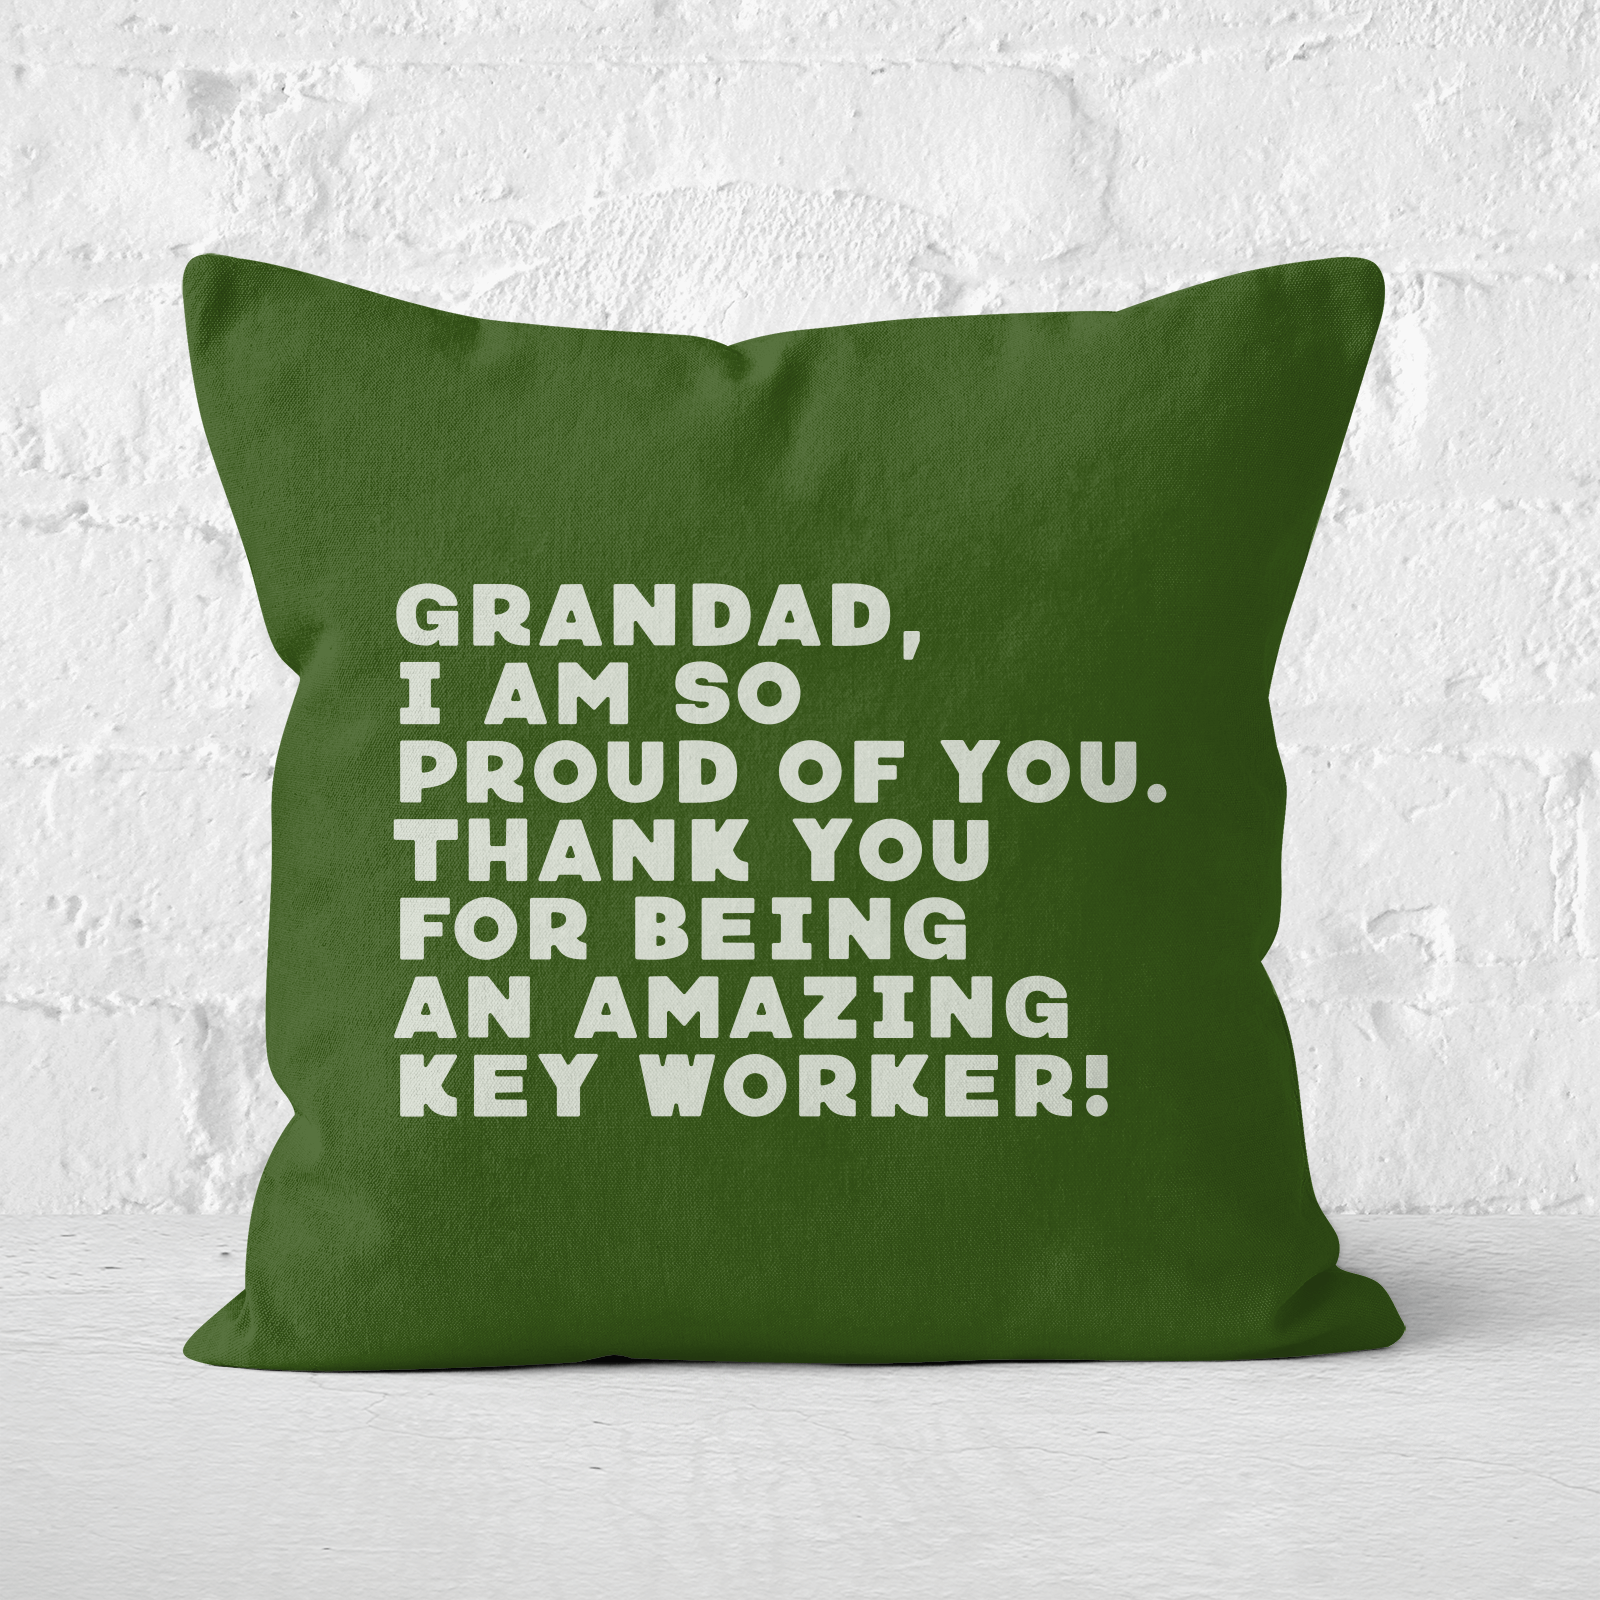 Grandad, I Am So Proud Of You. Square Cushion - 60x60cm - Soft Touch